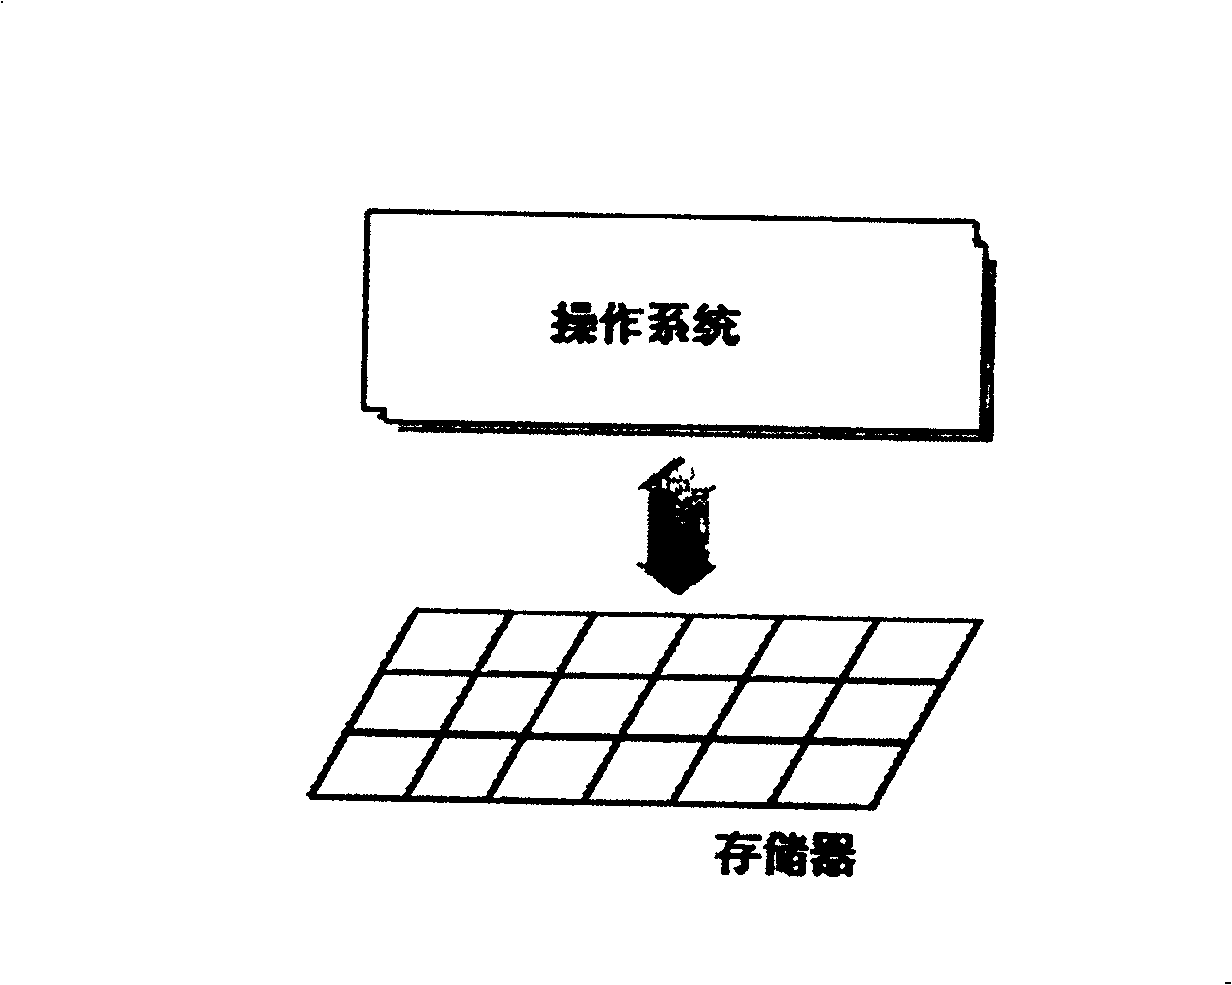 Method of continuous recording and reserving data changing by data map